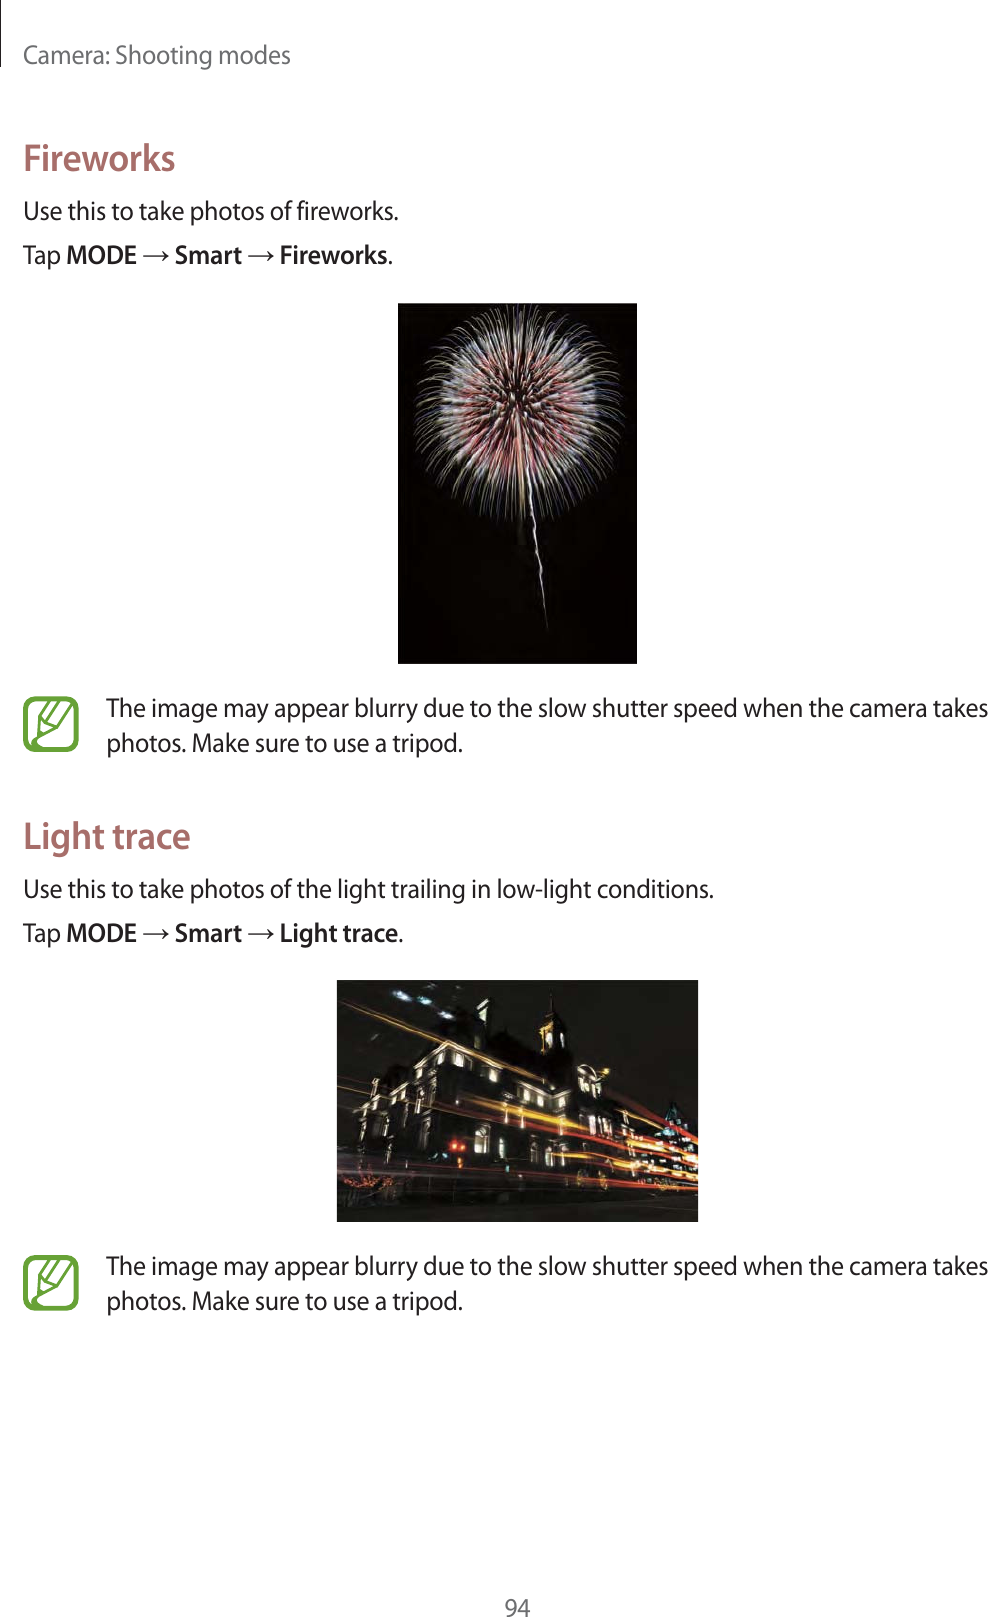 Camera: Shooting modes94FireworksUse this to take photos of fireworks.Tap MODE  Smart  Fireworks.The image may appear blurry due to the slow shutter speed when the camera takes photos. Make sure to use a tripod.Light traceUse this to take photos of the light trailing in low-light conditions.Tap MODE  Smart  Light trace.The image may appear blurry due to the slow shutter speed when the camera takes photos. Make sure to use a tripod.